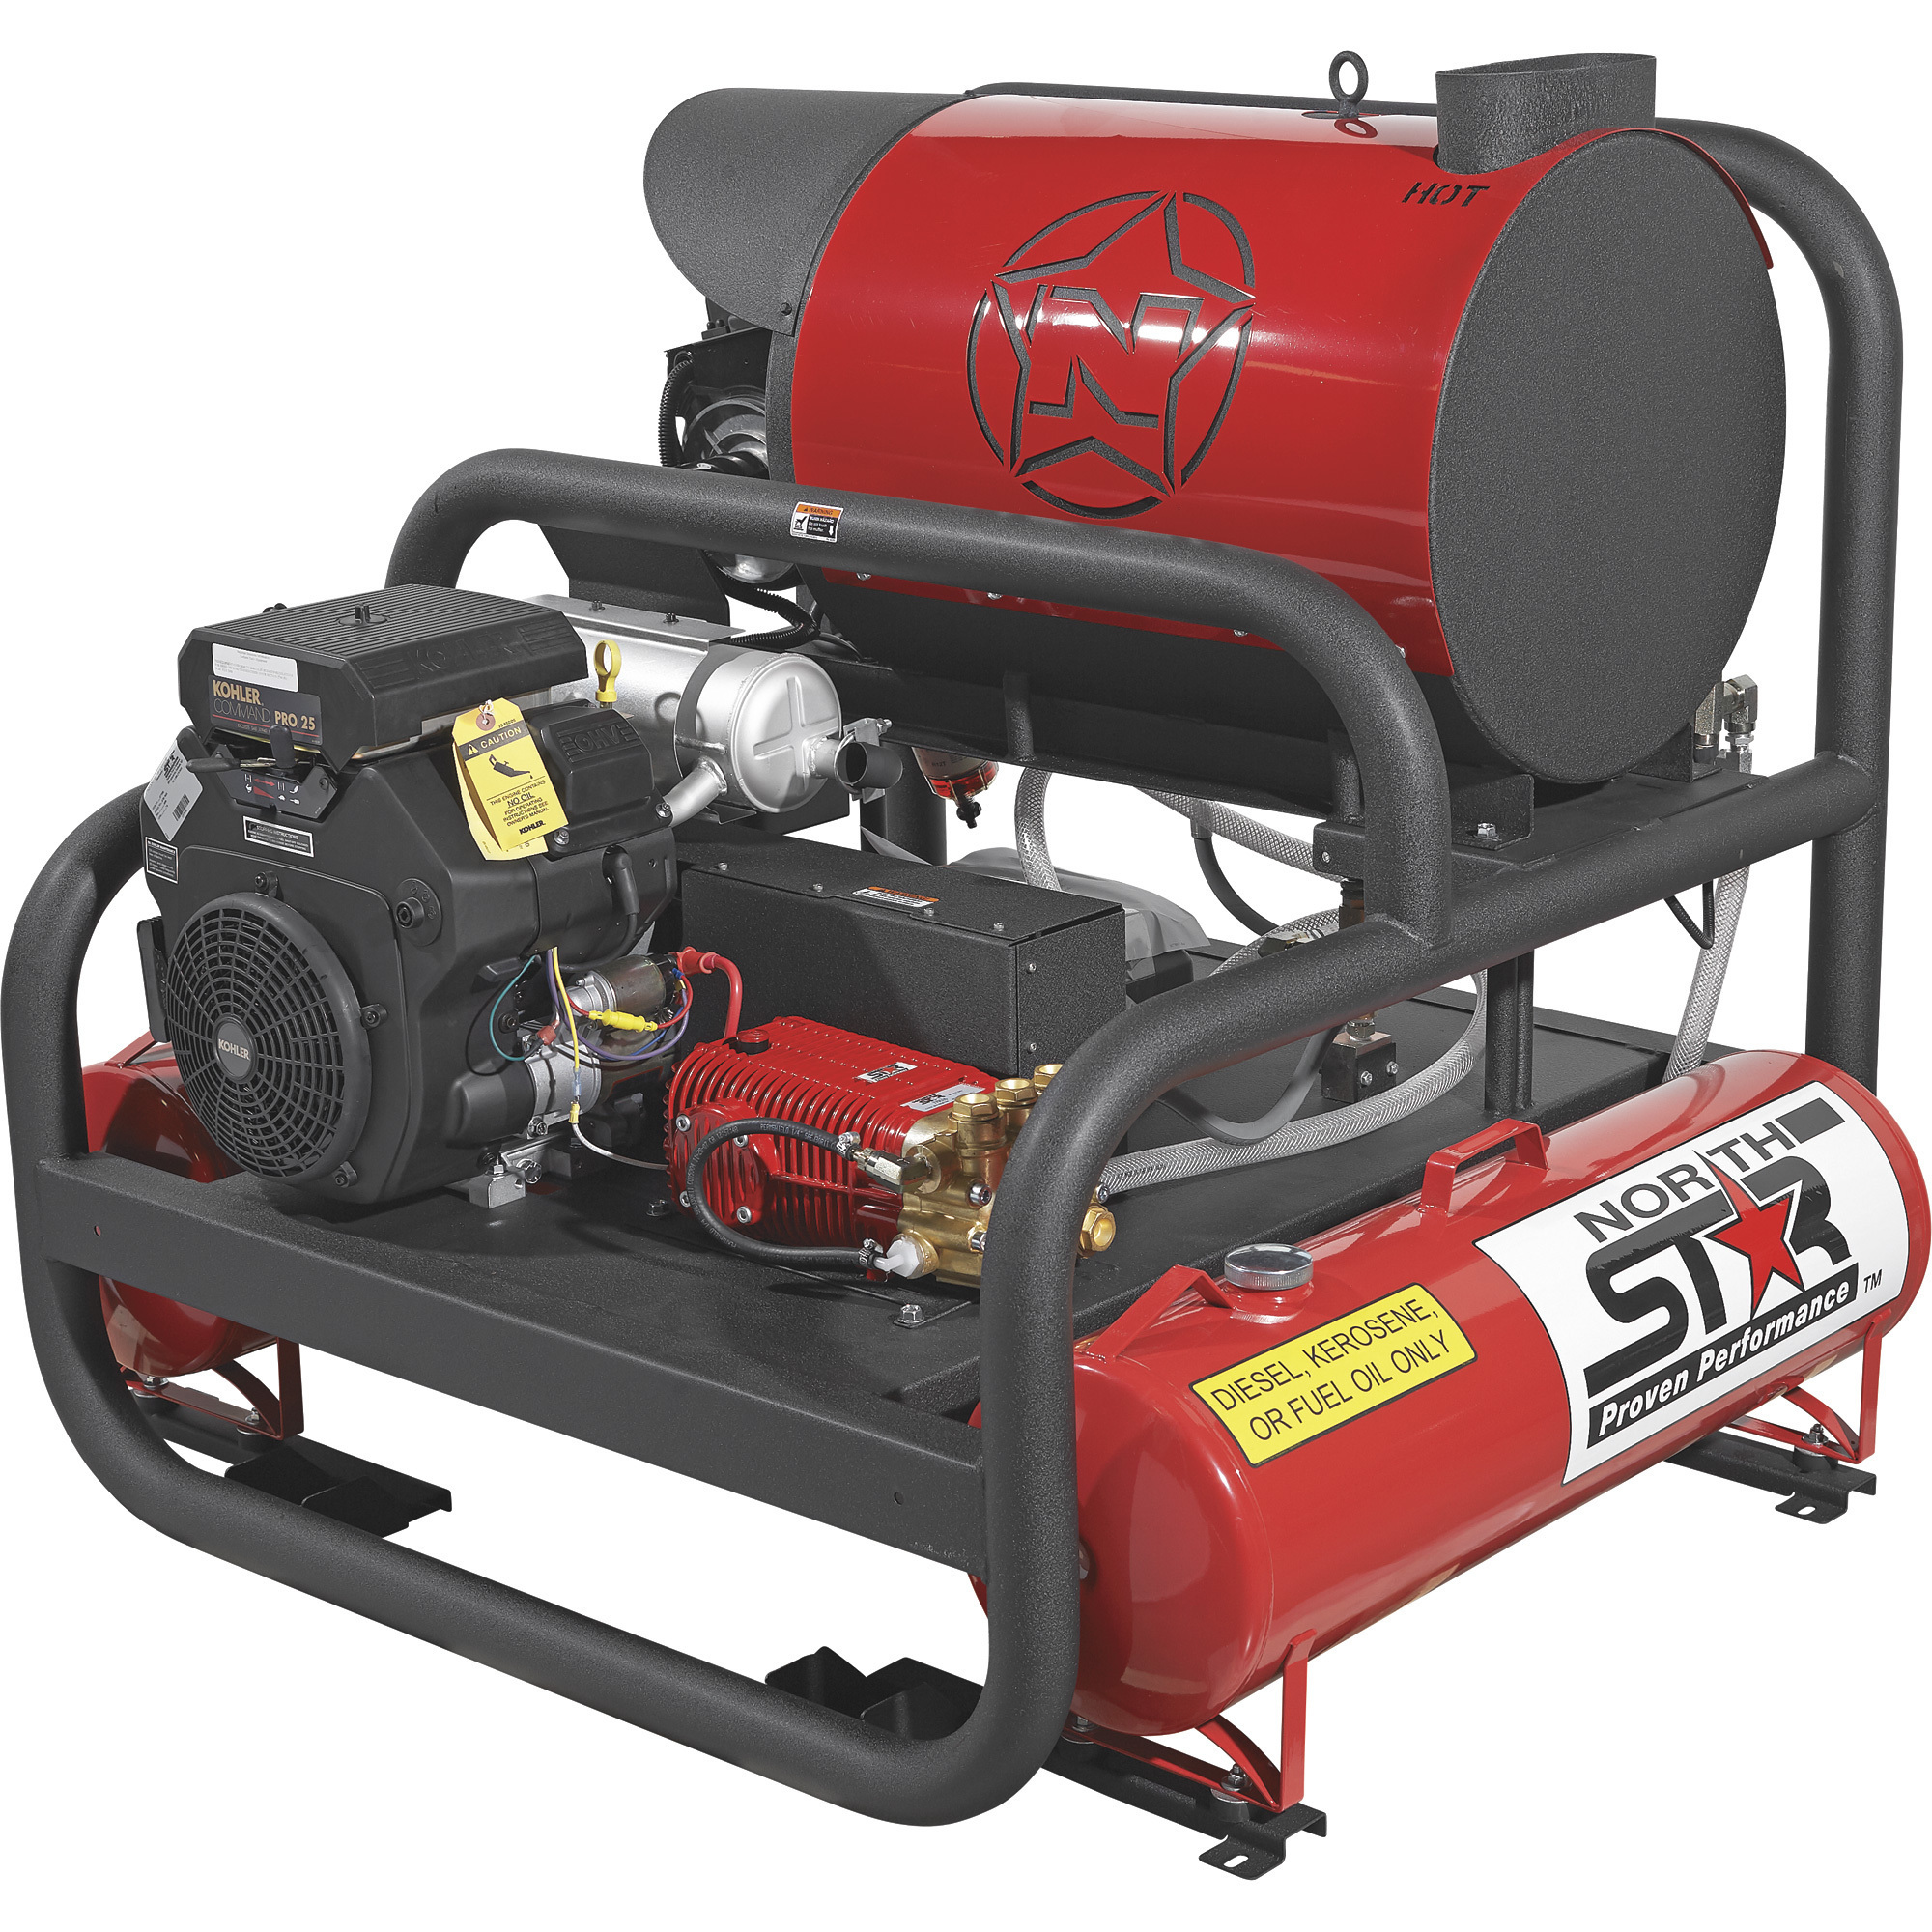 NorthStar Hot Water Commercial Pressure Washer Skid with 2 Wands, 4000 PSI, 7.0 GPM, Kohler Engine